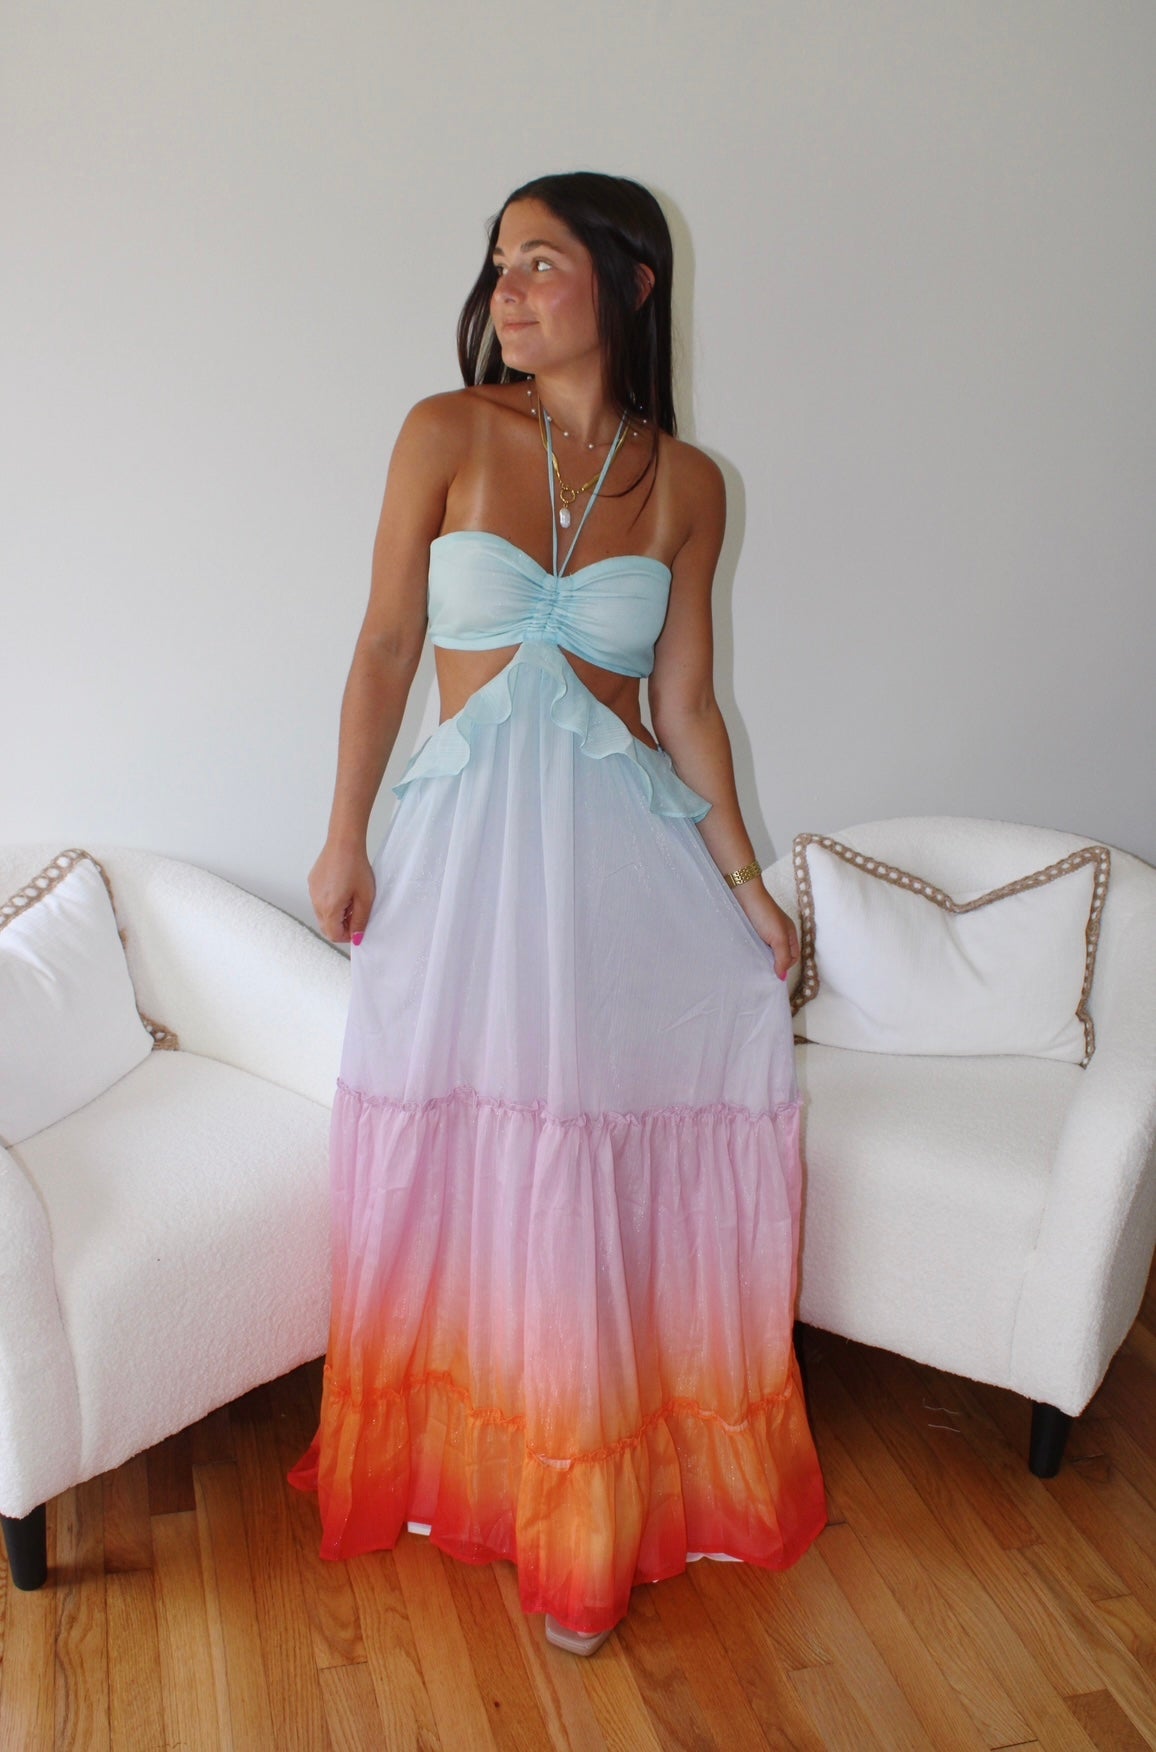 Living In The Moment Maxi Dress - Multicolored